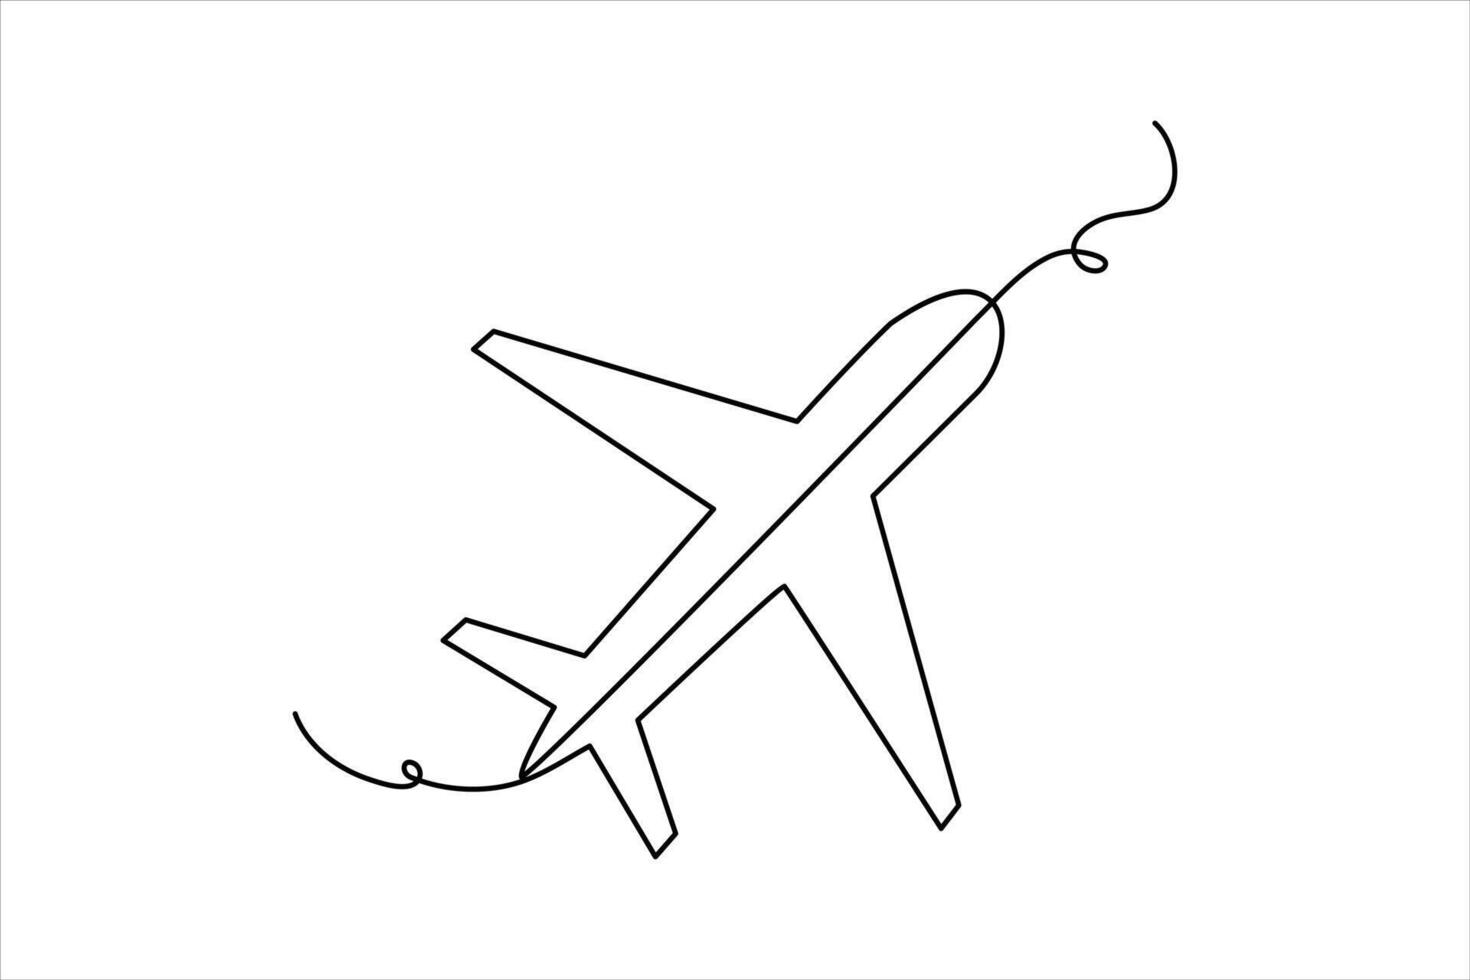 Continuous one line Airplan icon outline vector art illustration